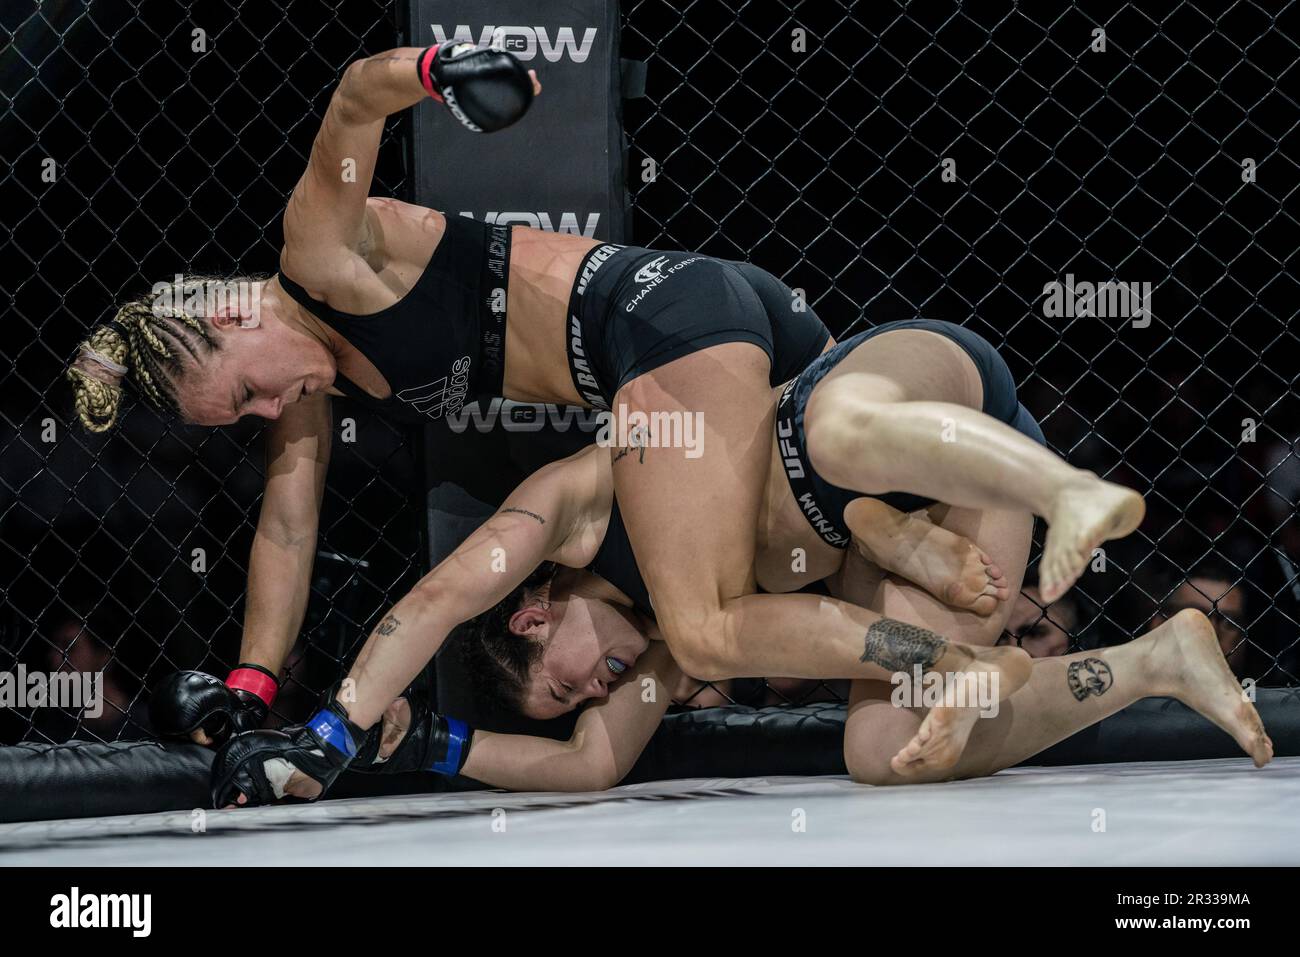 Madrid, Spain. 20th May, 2023. Chanel Forster and Mercedes Custodio fight during the Mixed Martial Arts competition 'WOW 9 : El Camino del Guerrero' at Palacio de Vistalegre Arena. Credit: SOPA Images Limited/Alamy Live News Stock Photo